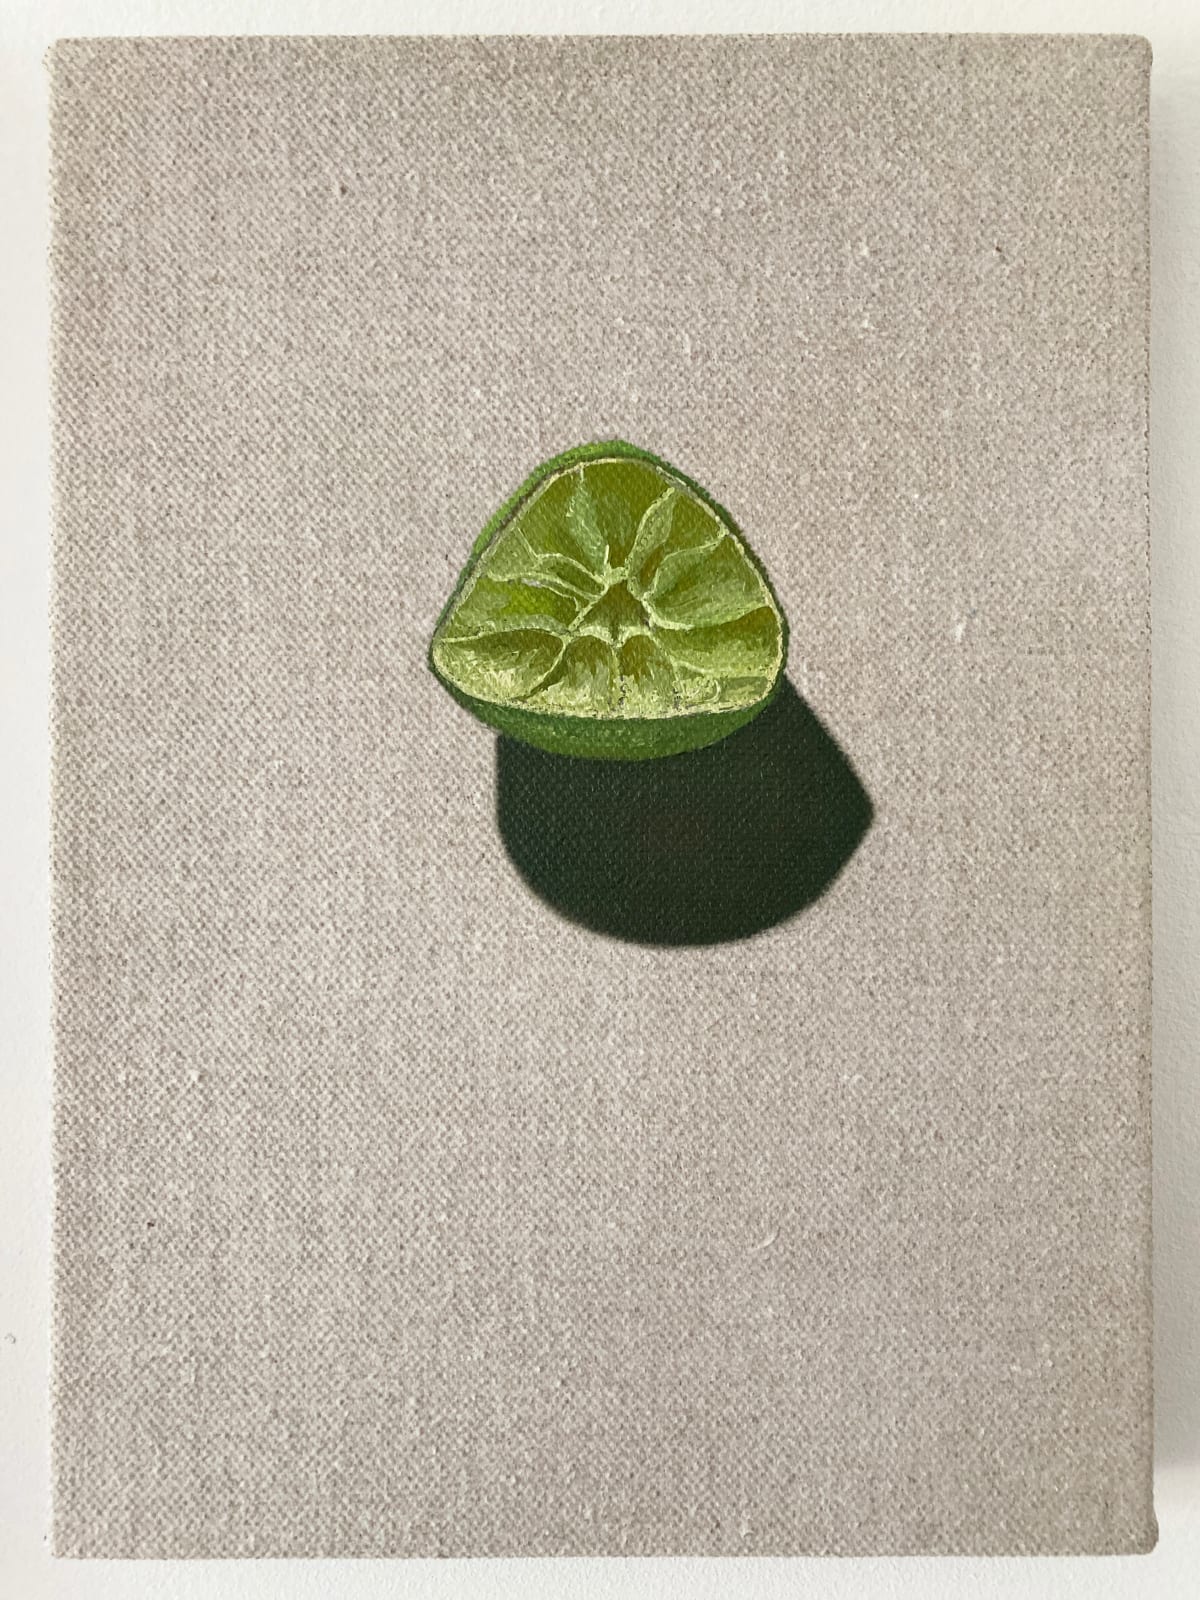 Brad Nelson, A Relationship With The Sun (Squeezed Lime), 2021